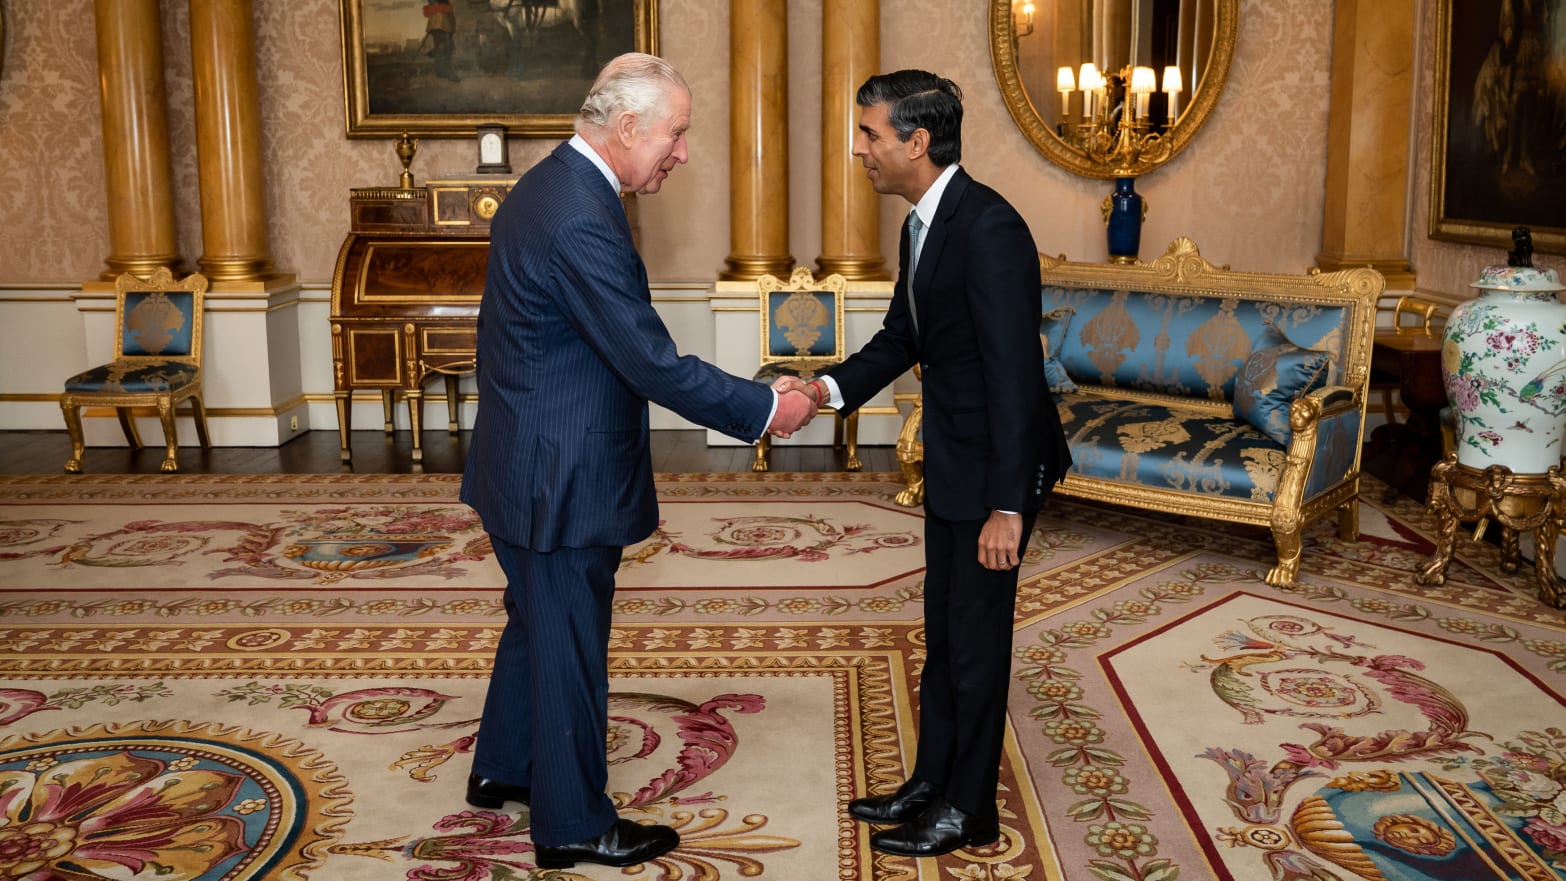 King Charles III greets newly appointed Conservative Party leader and incoming prime minister Rishi Sunak during an audience at Buckingham Palace in London on October 25, 2022